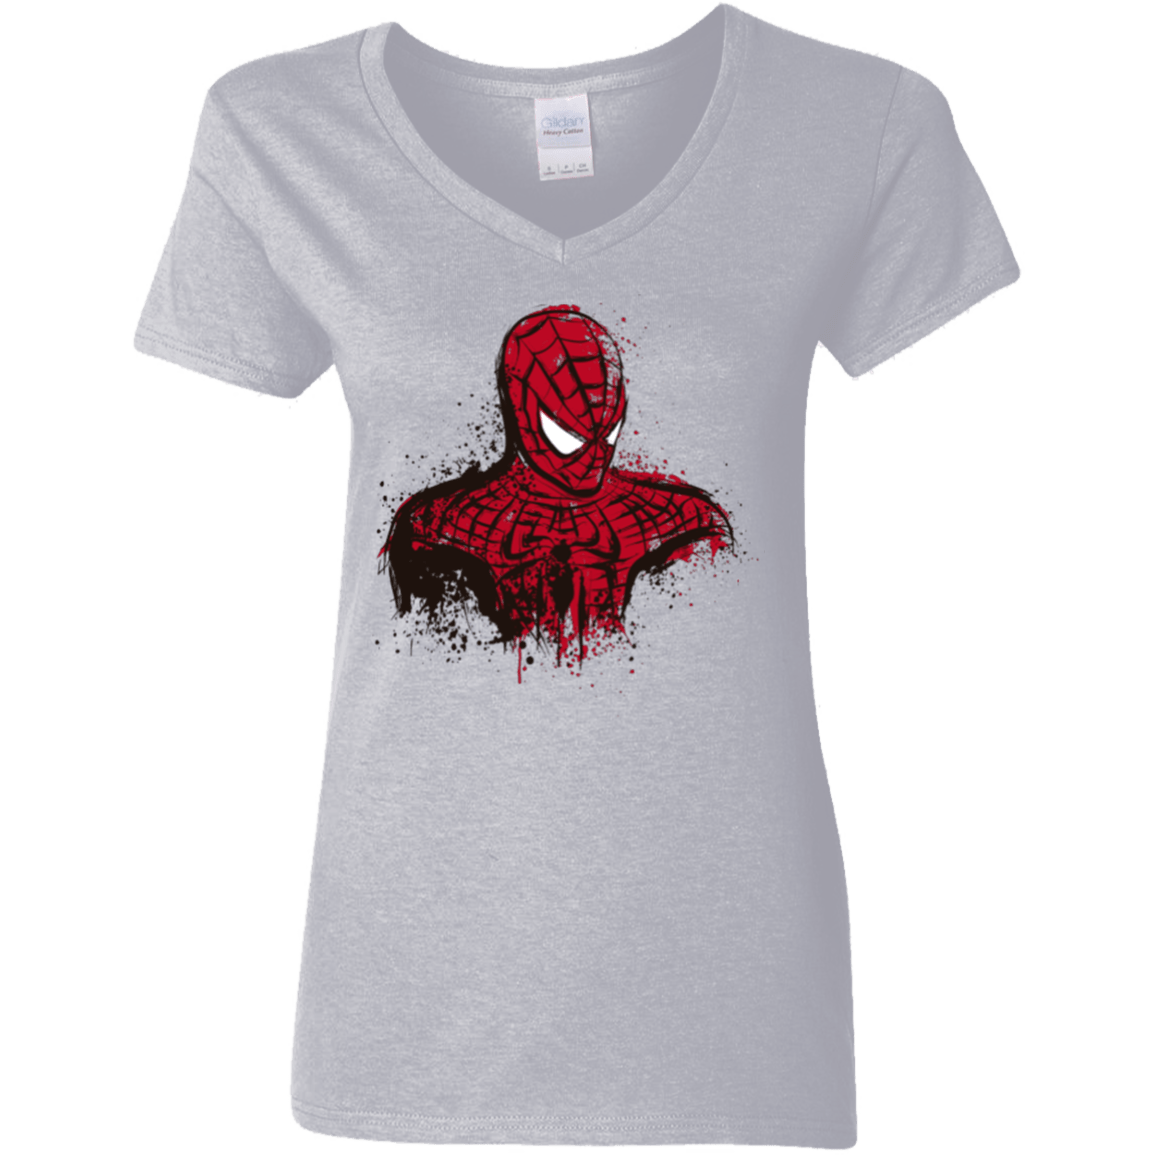 T-Shirts Sport Grey / S Behind the Mask Women's V-Neck T-Shirt